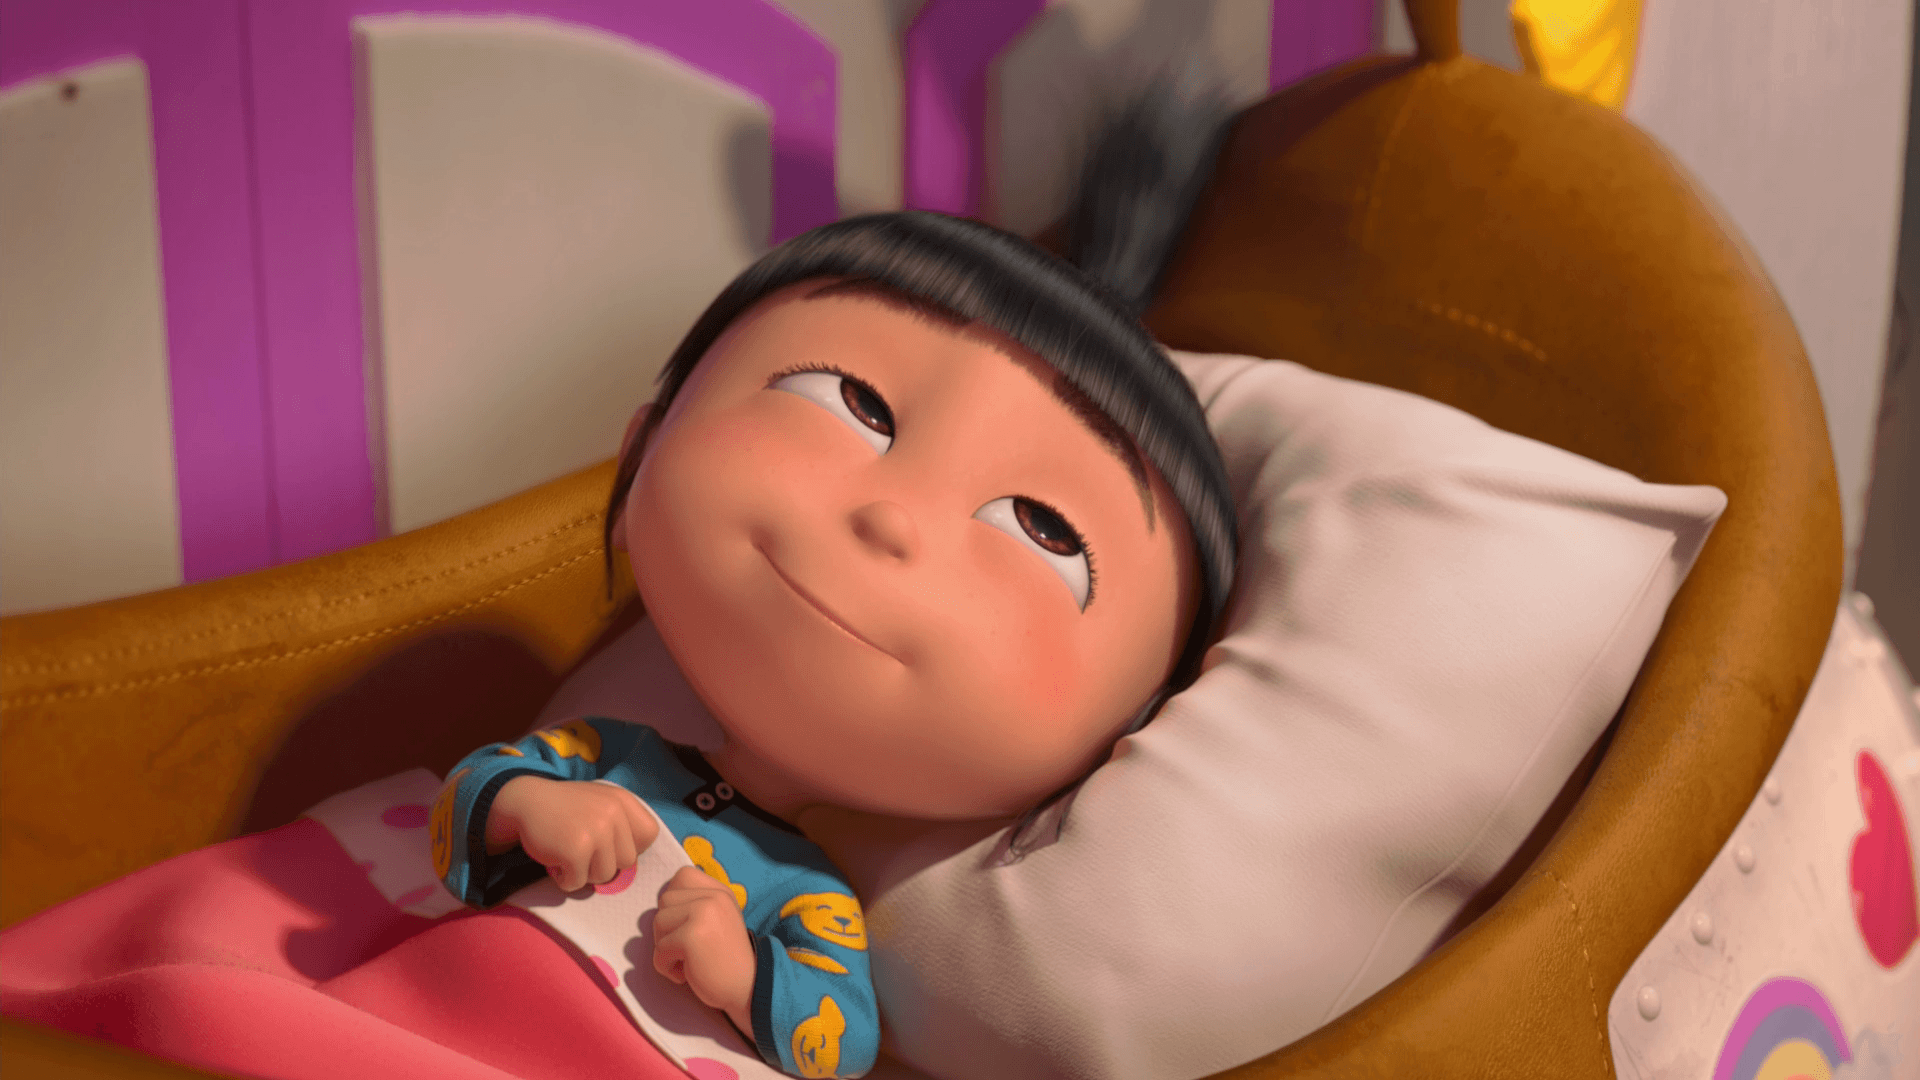 219004 1920x1040 Agnes Despicable Me  Rare Gallery HD Wallpapers